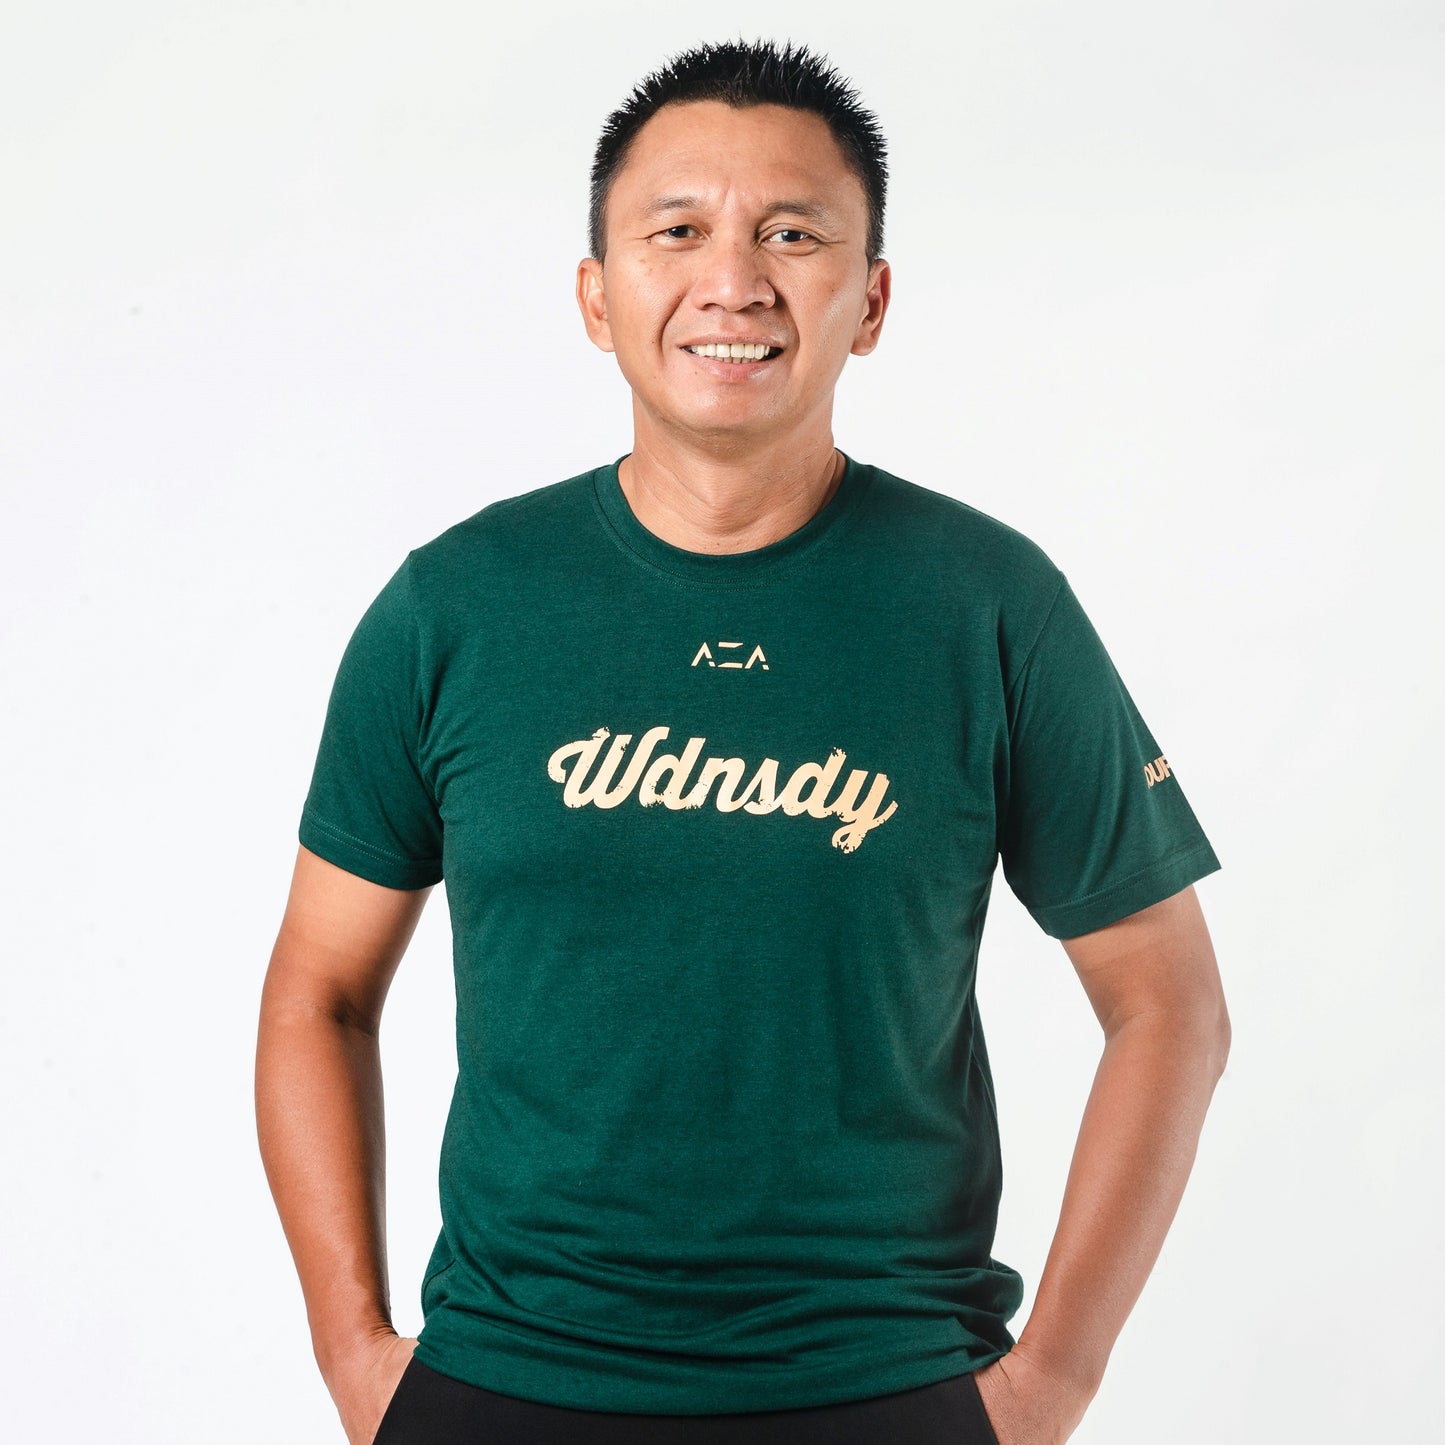 AZA x WDNSDY Journey T-Shirt - Forest Green